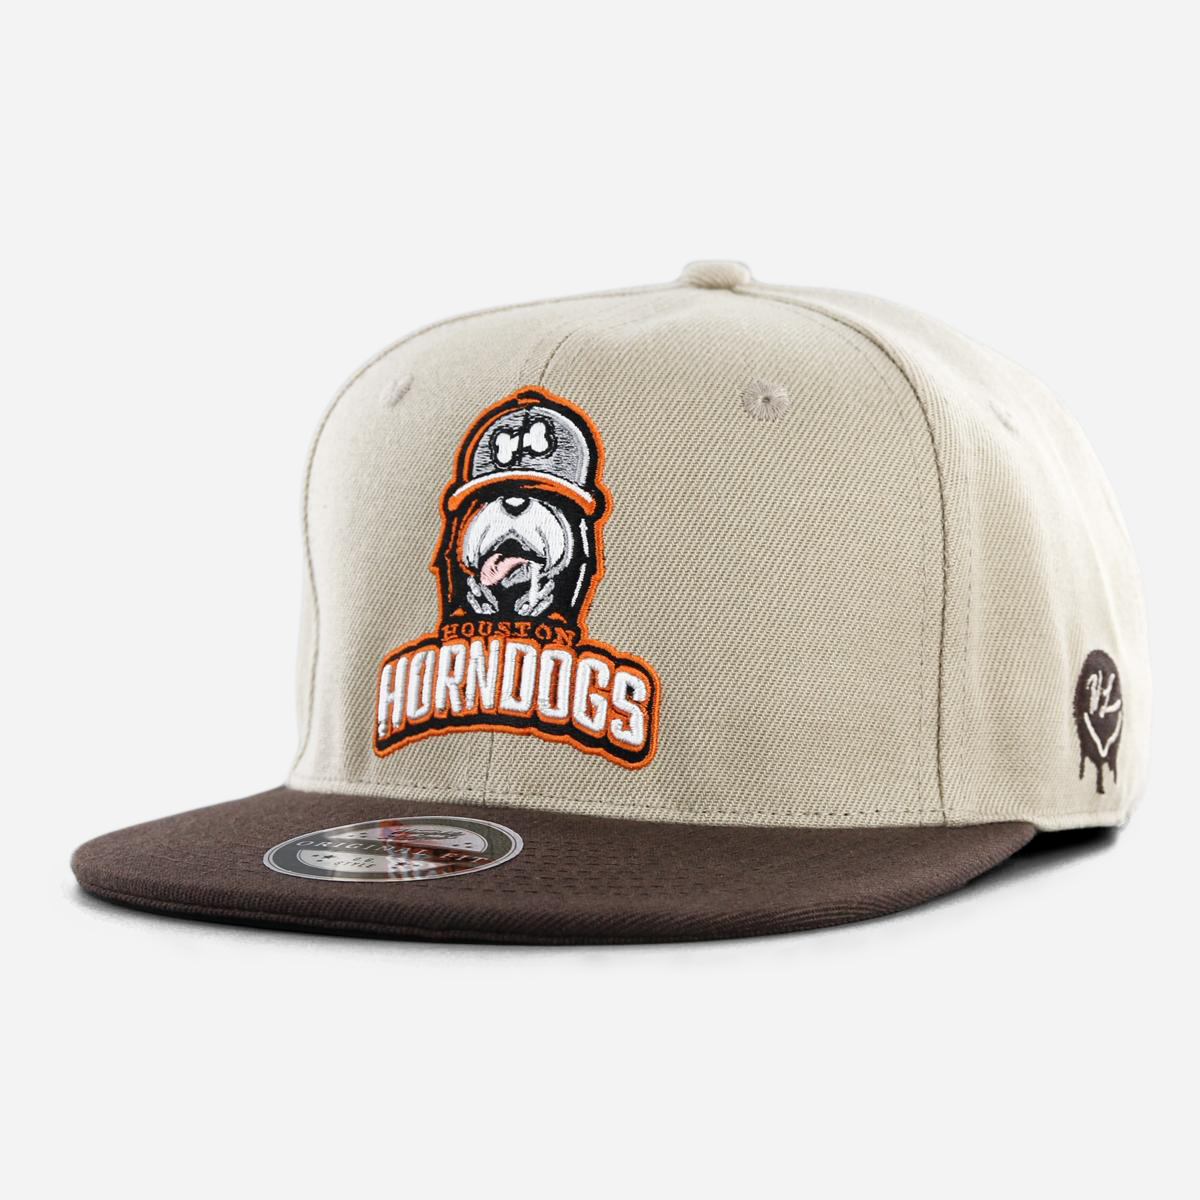 Houston Horndogs Fitted Khaki/Brown